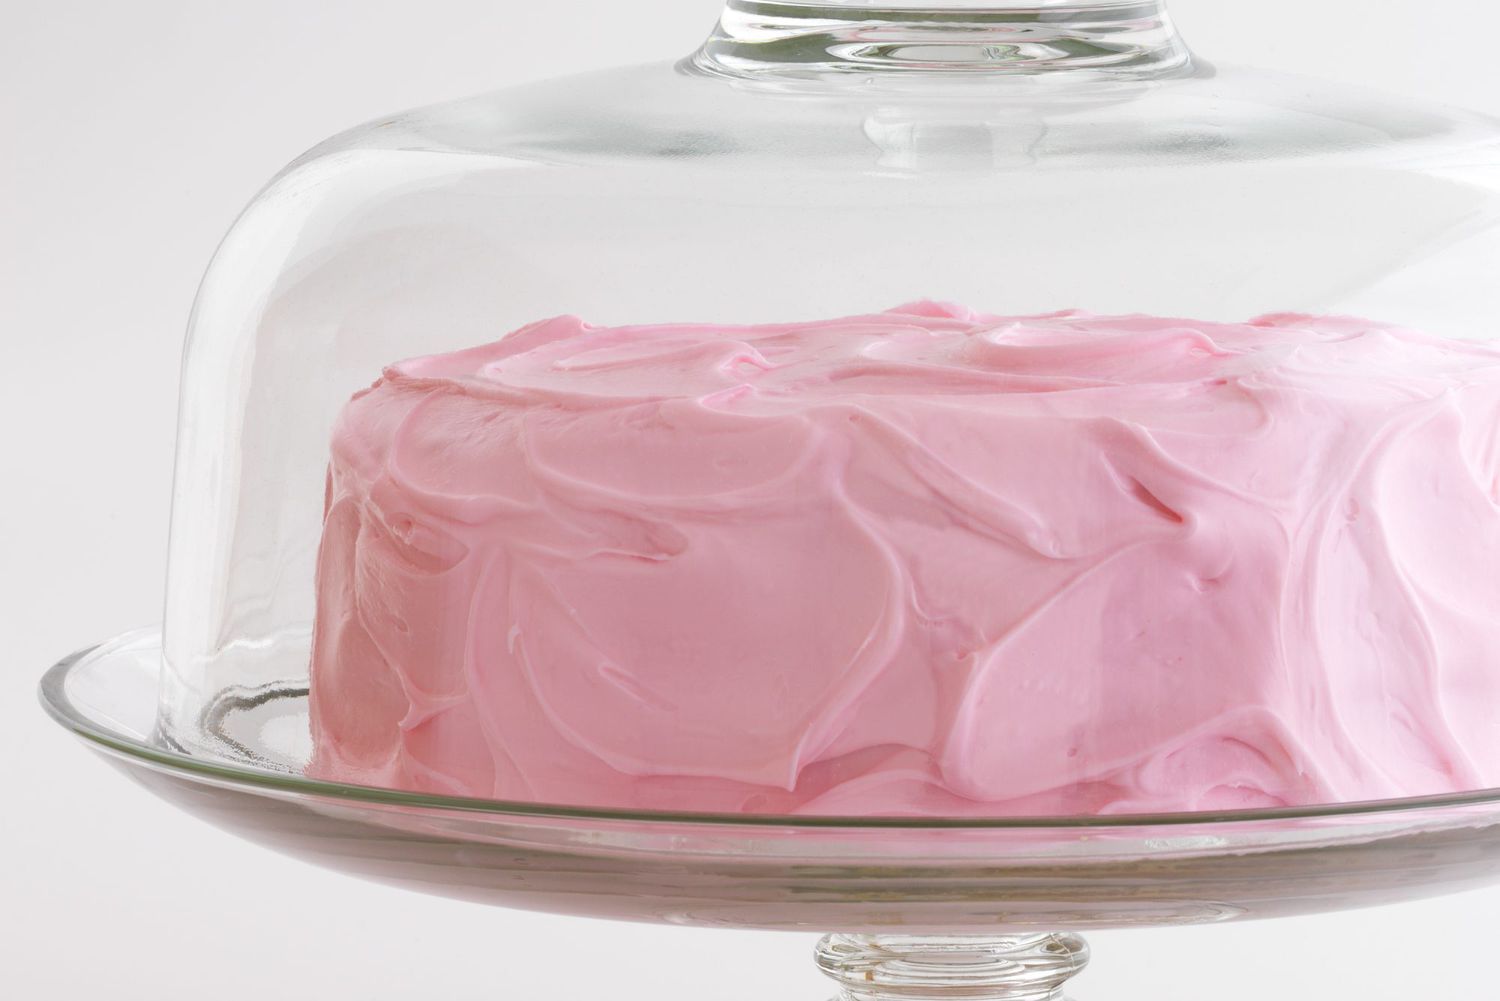 How To Store Frosted Cake Overnight